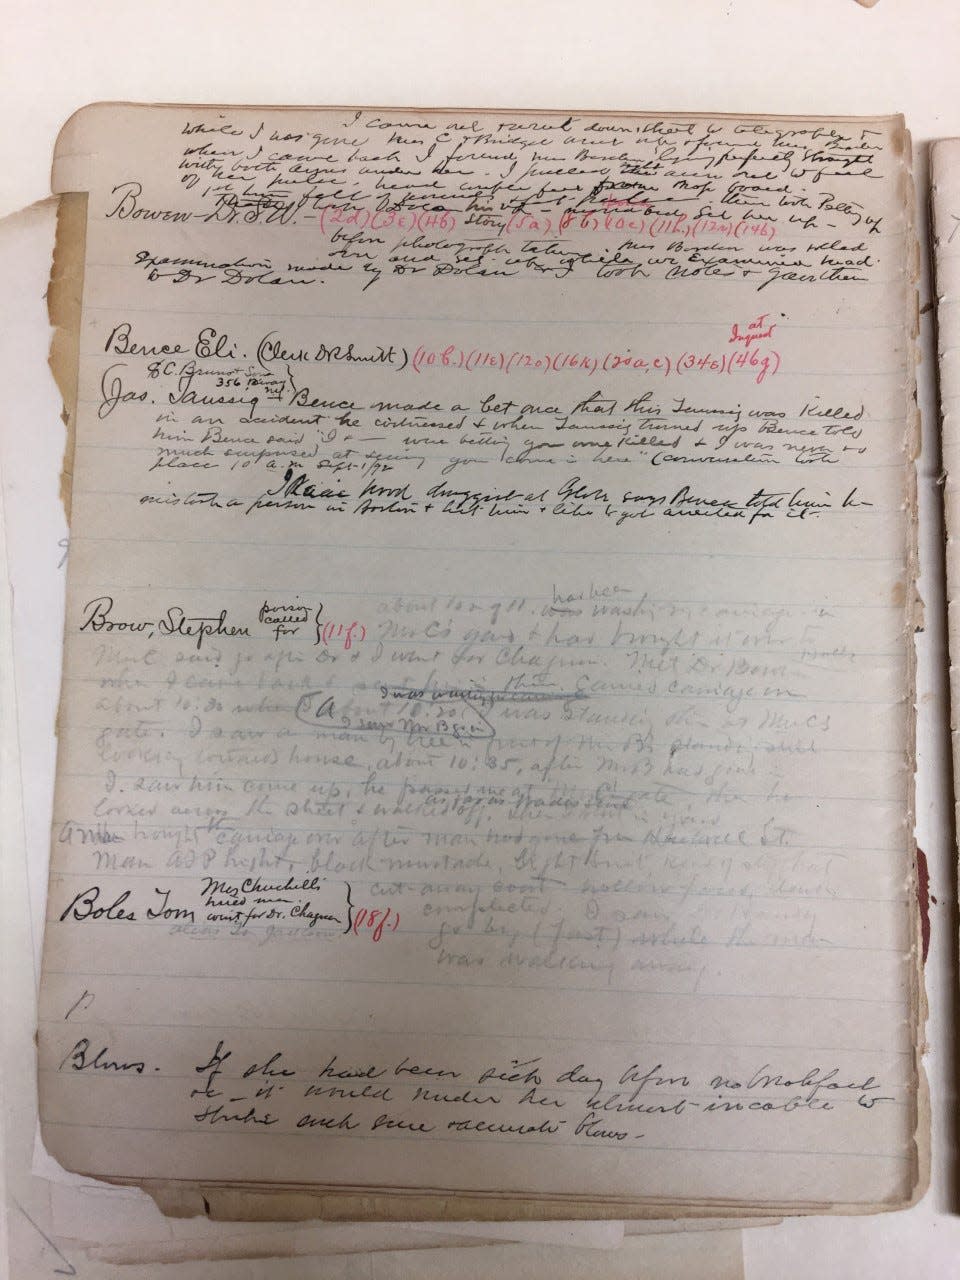 A page from the original copy of a journal kept by Andrew Jackson Jennings, defense lawyer for Lizzie Borden. The journal was transcribed by editors at the Fall River Historical Society Press.